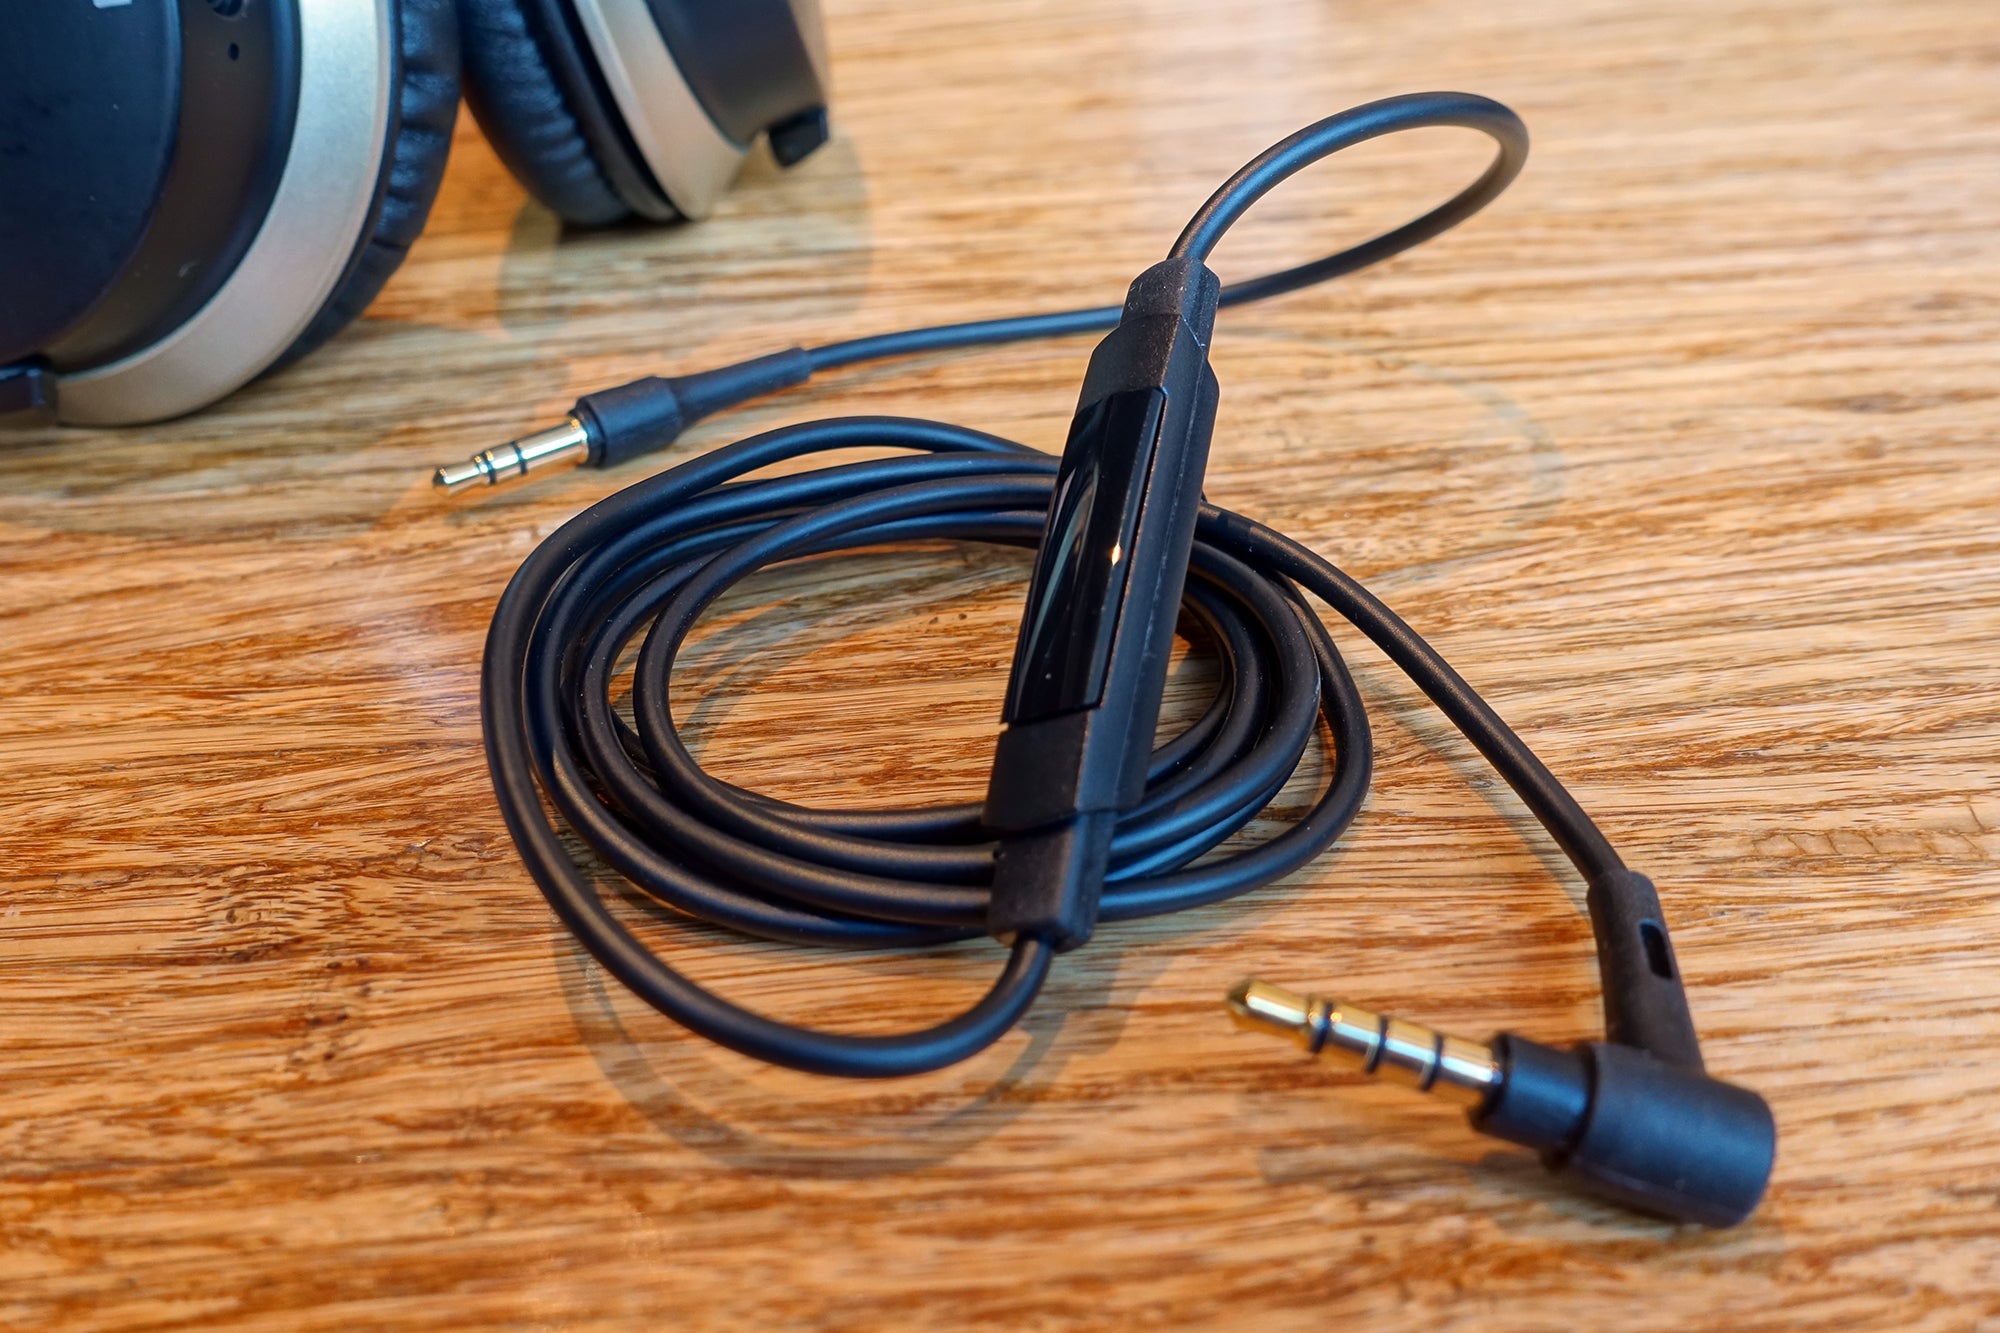 Audio-Technica SonicFuel ATH-AR3BT Review | Trusted Reviews